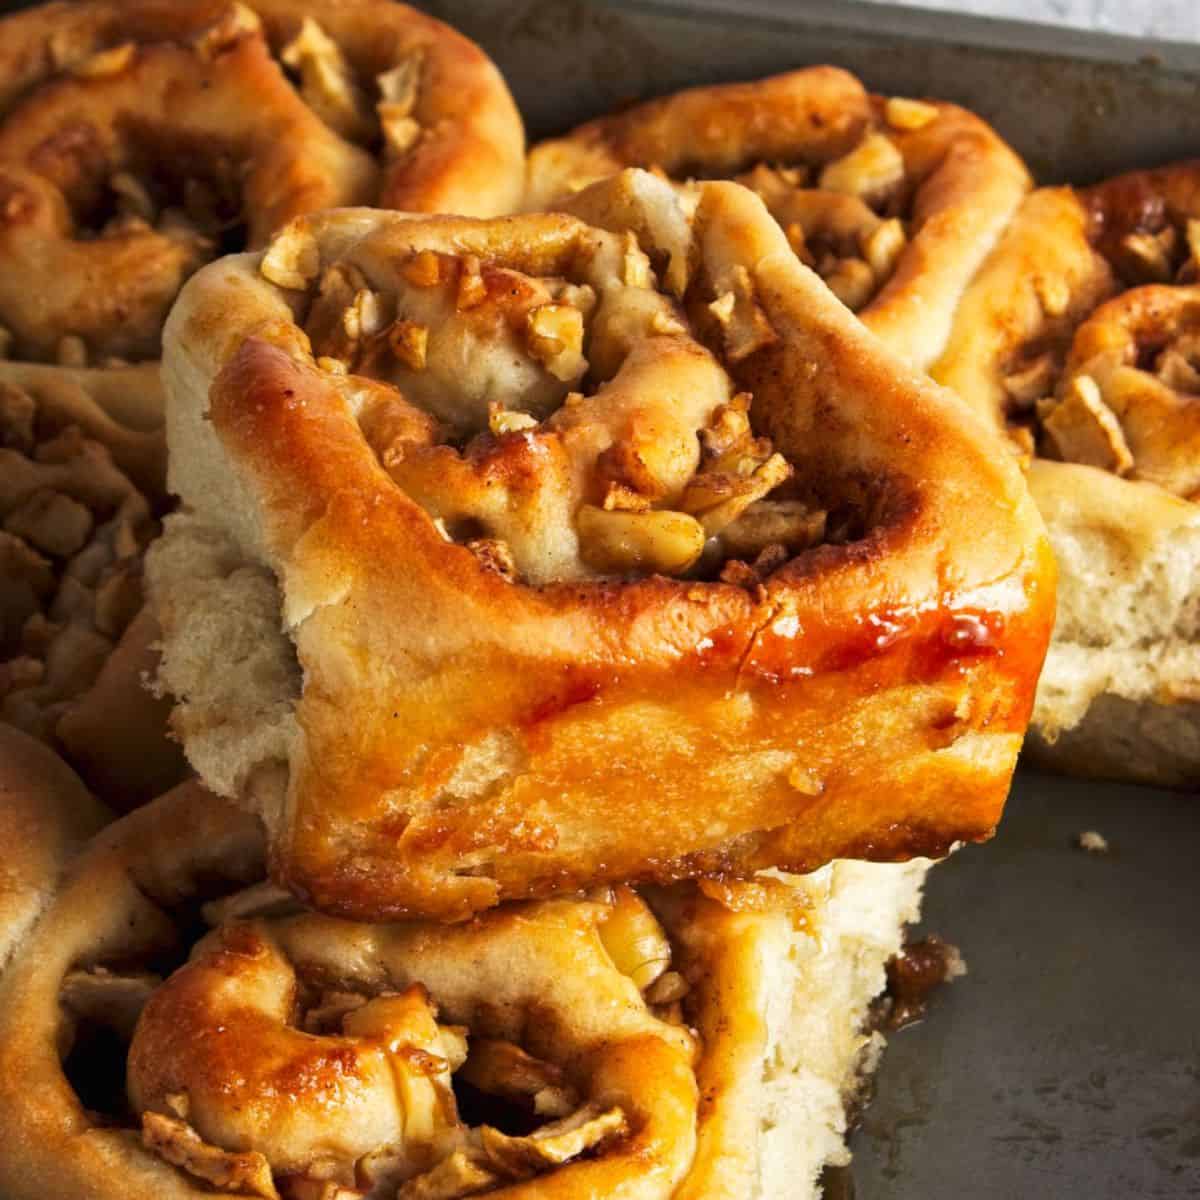 Vegan sticky bun picture to show texture